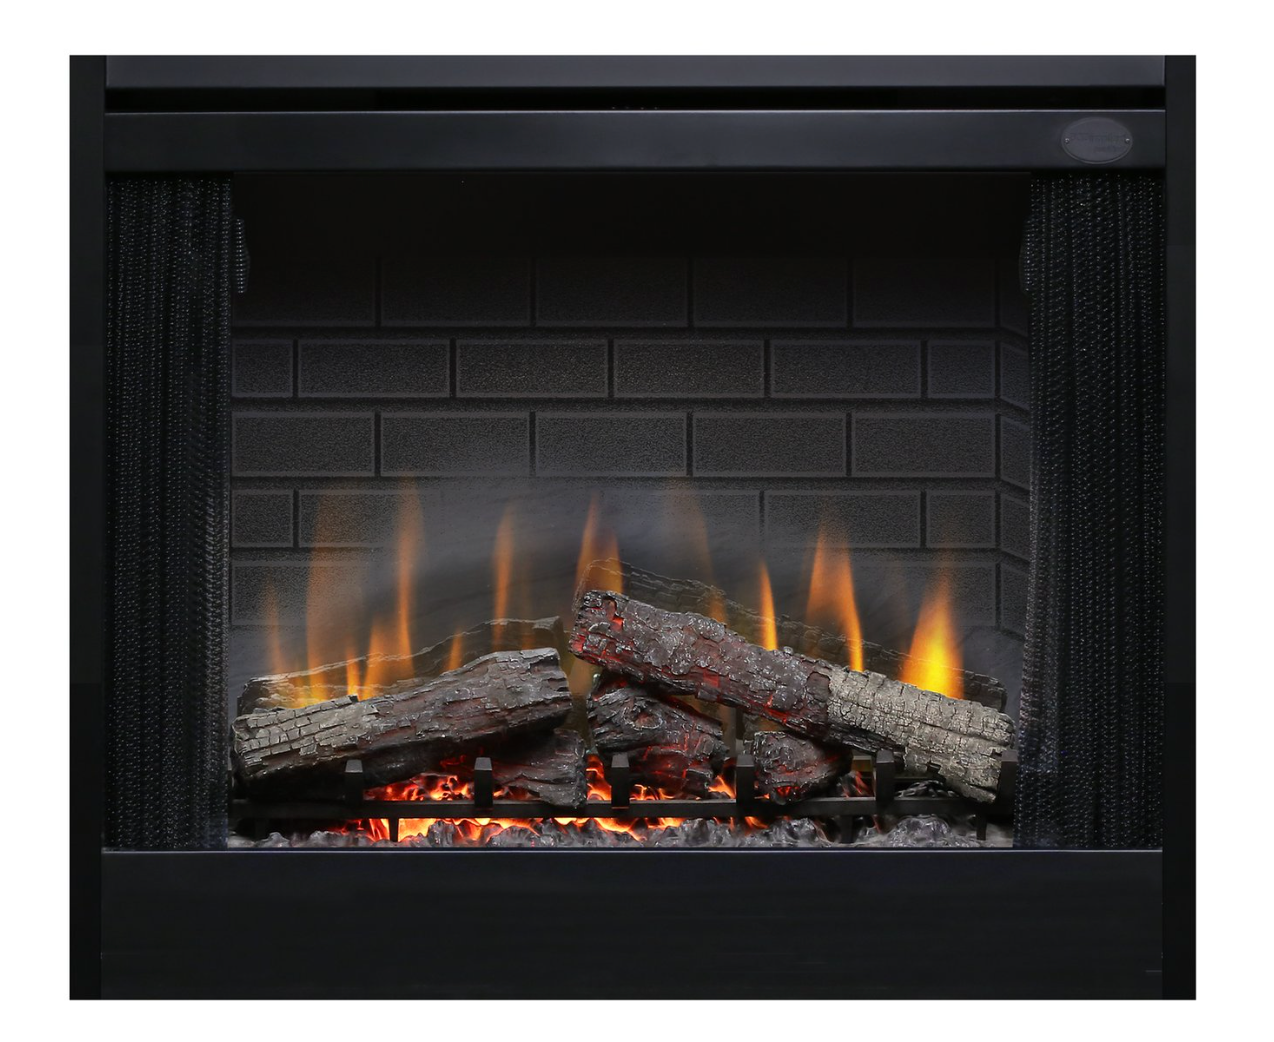 Dimplex Deluxe 39" Built-In Electric Firebox